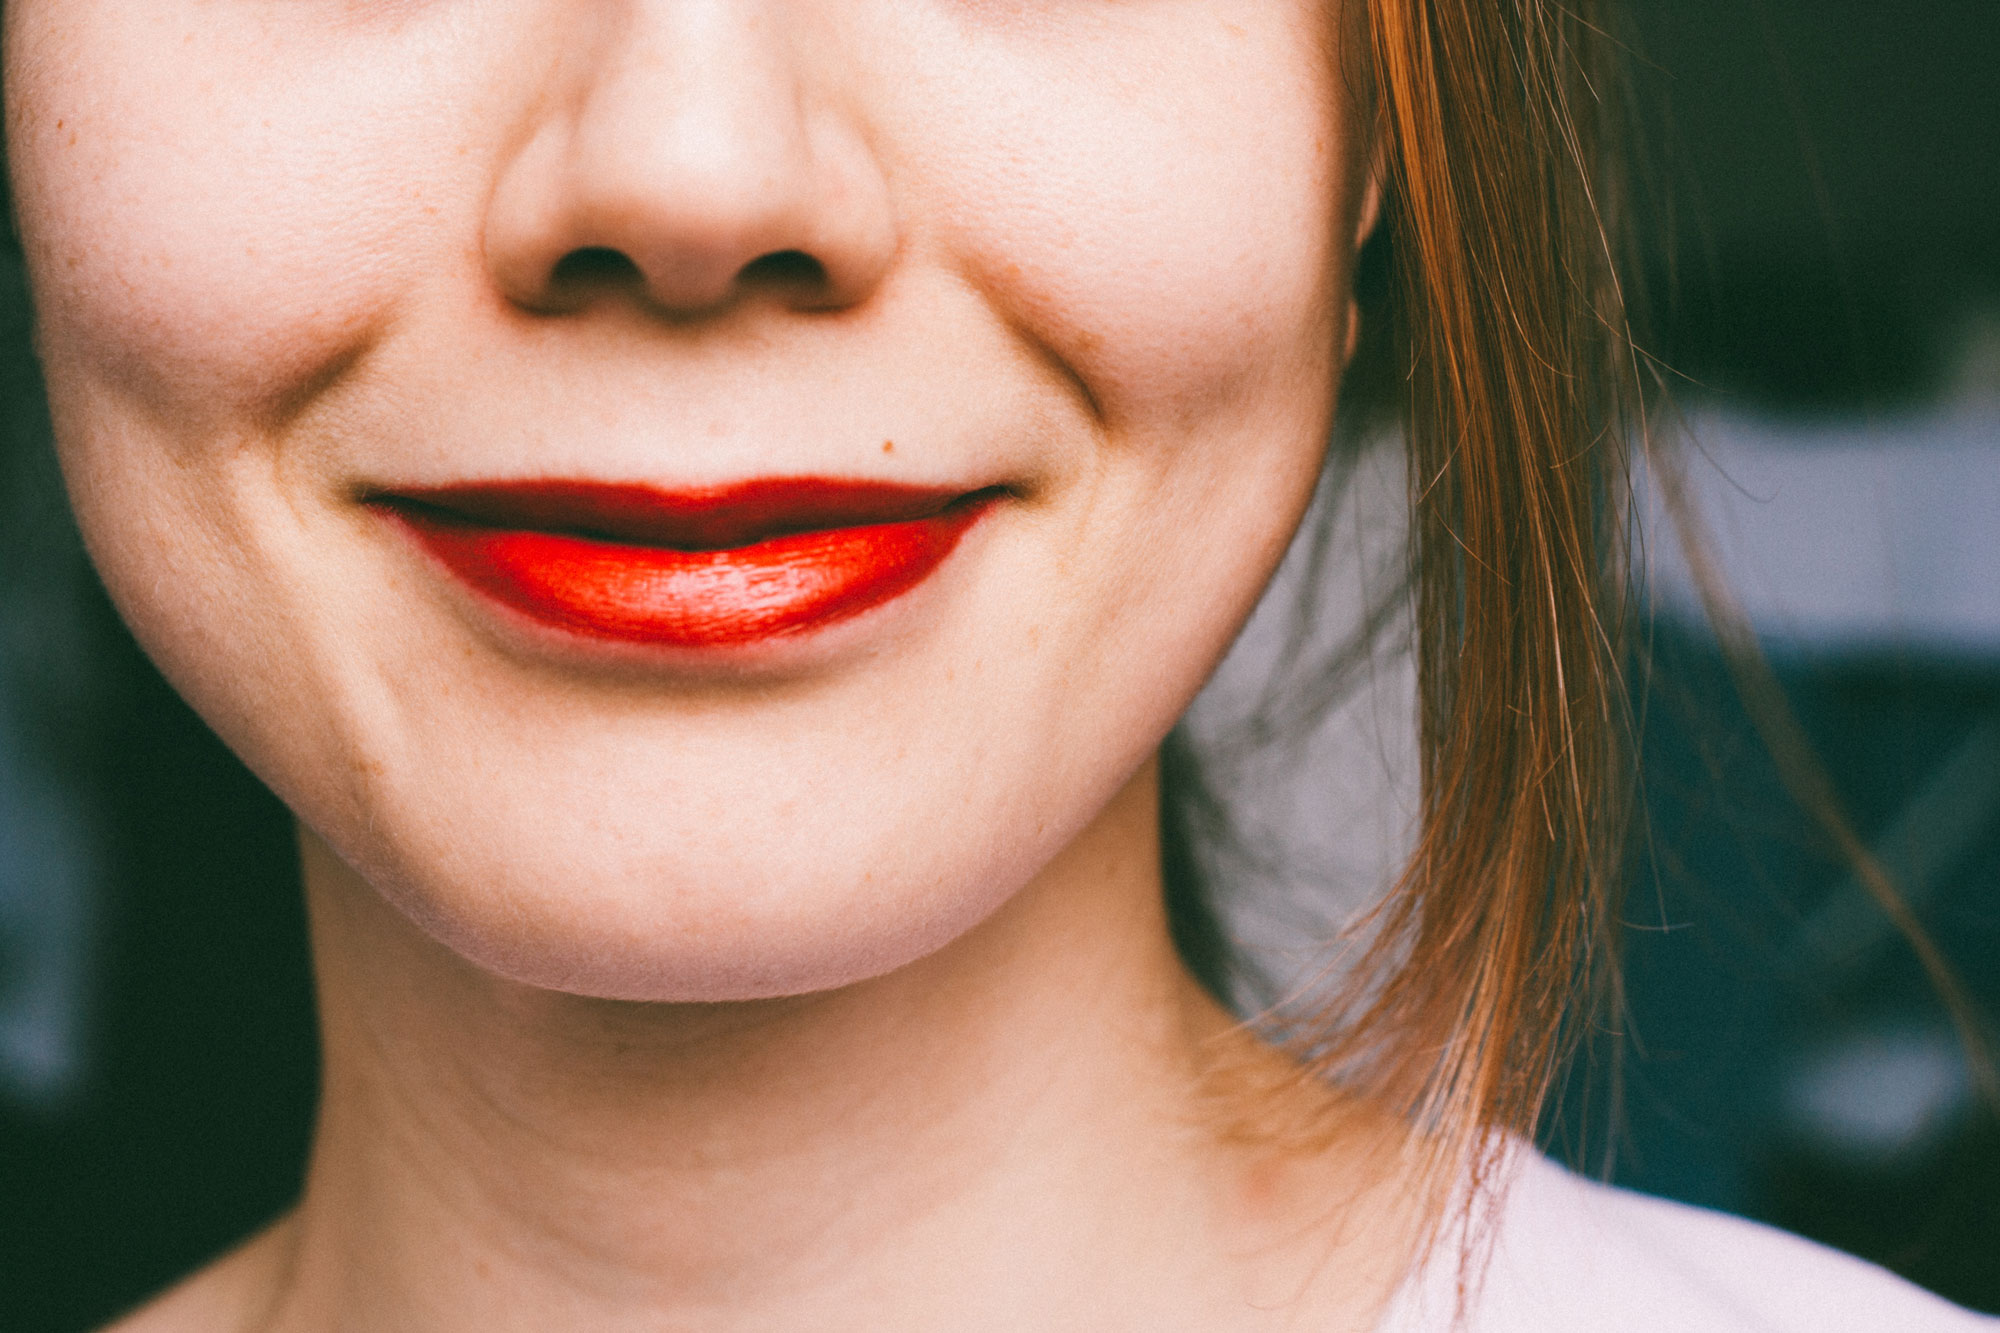 Part of a woman's face wearing red lipstick